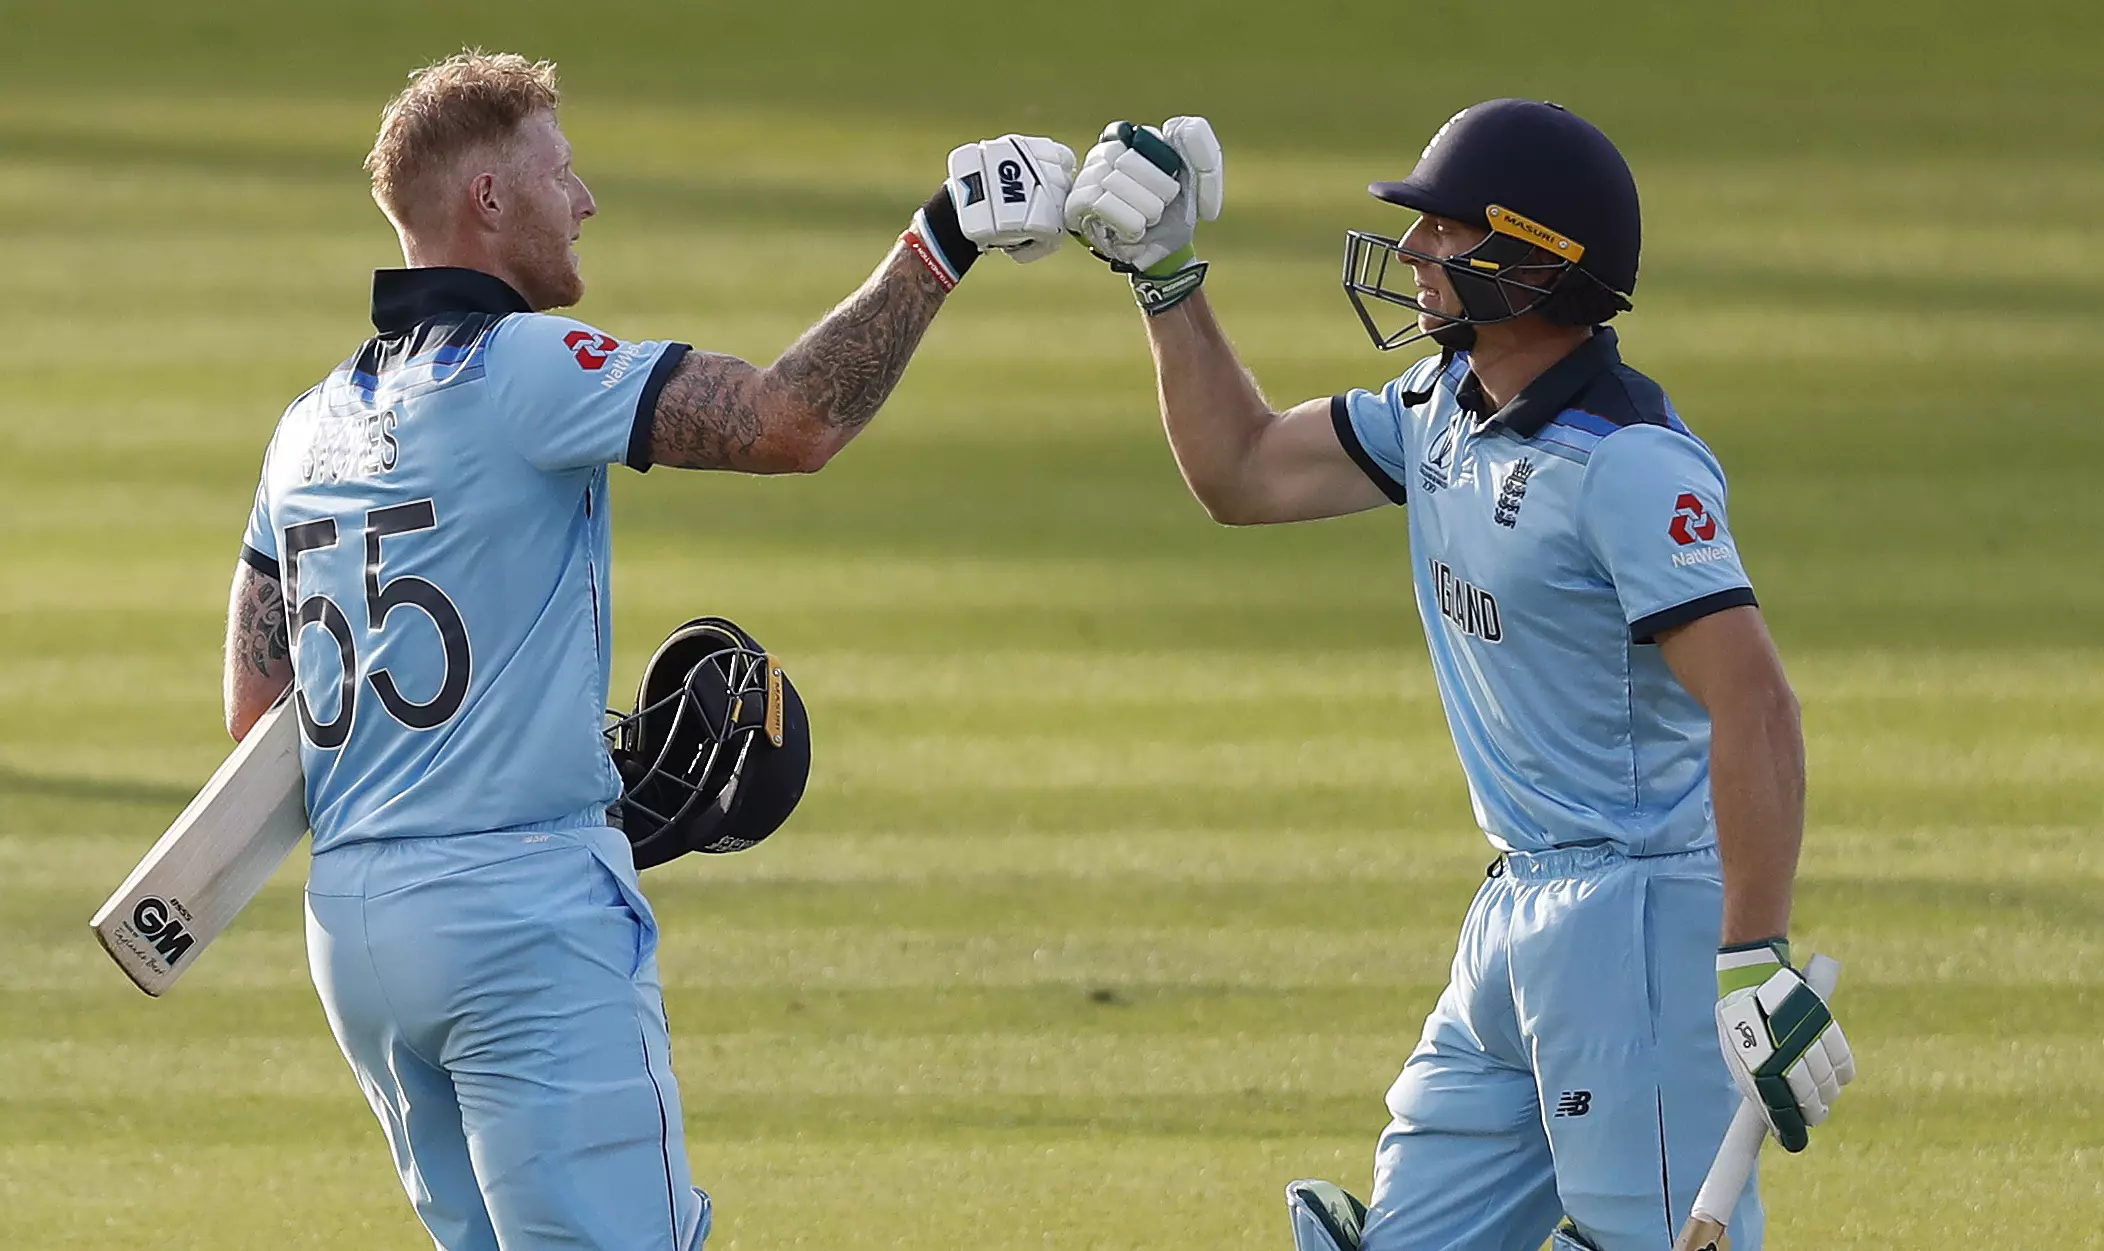 The punter owes Ben Stokes and Jos Buttler a drink. Image: PA Images